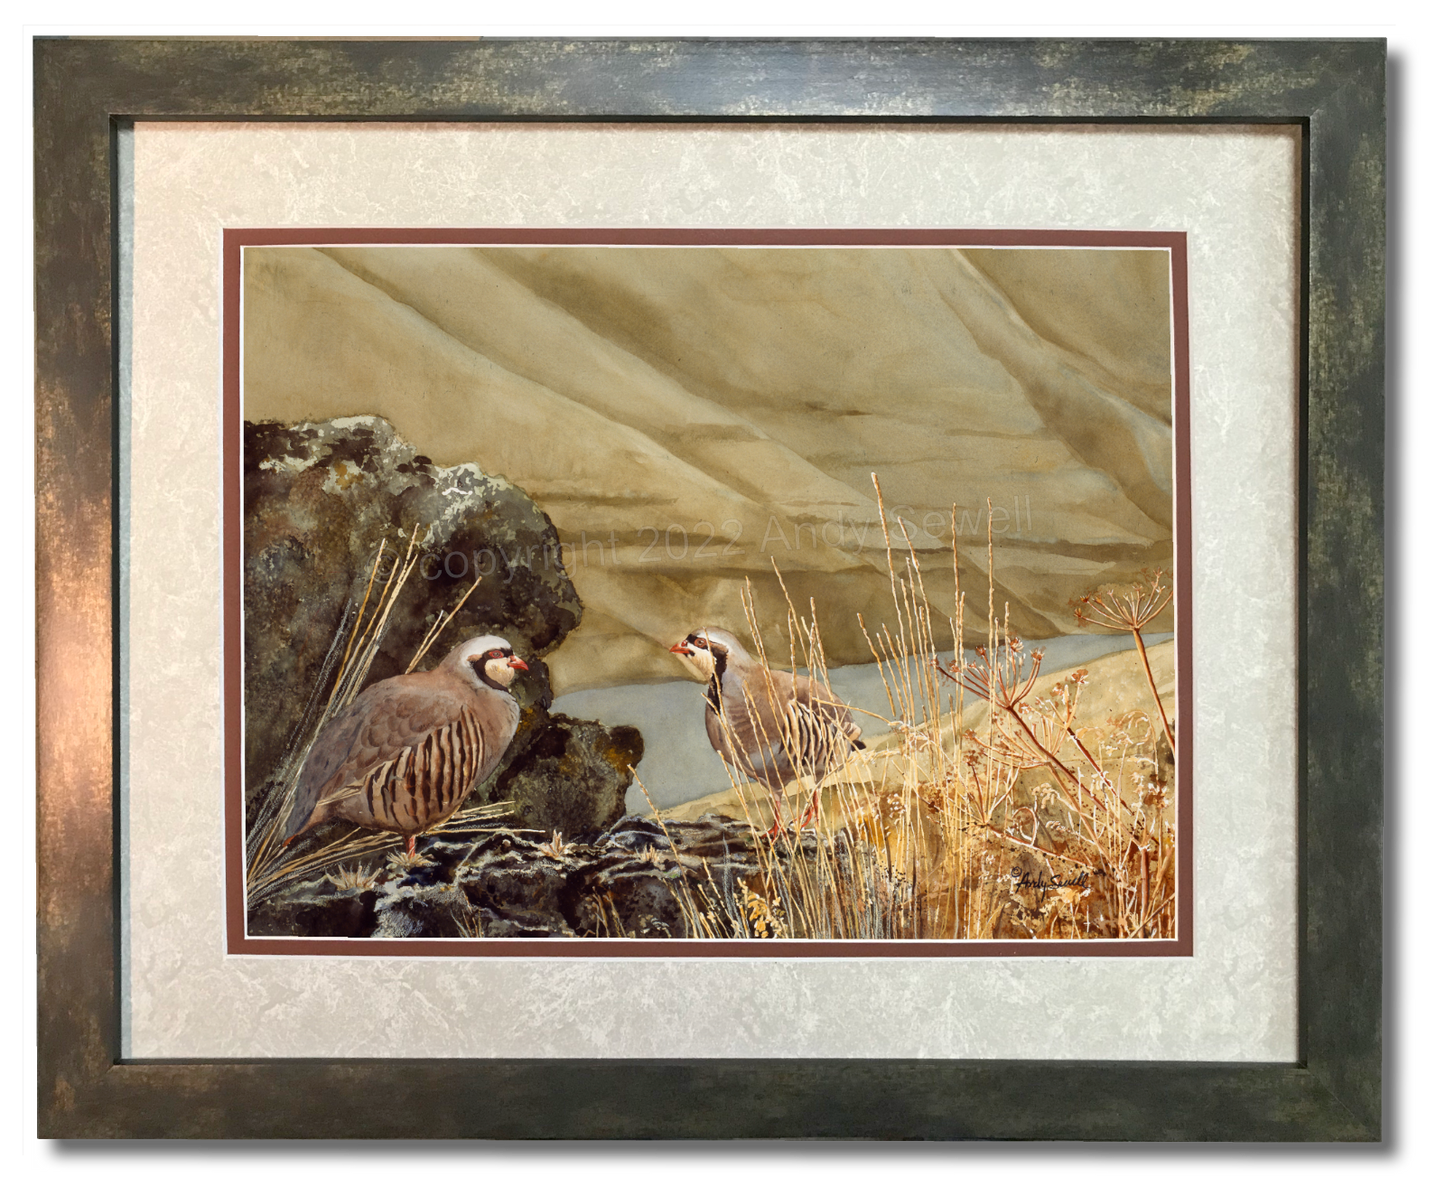 "Chukars on the Snake" - A limited edition s/n Giclee art print from an Original watercolor of chukars